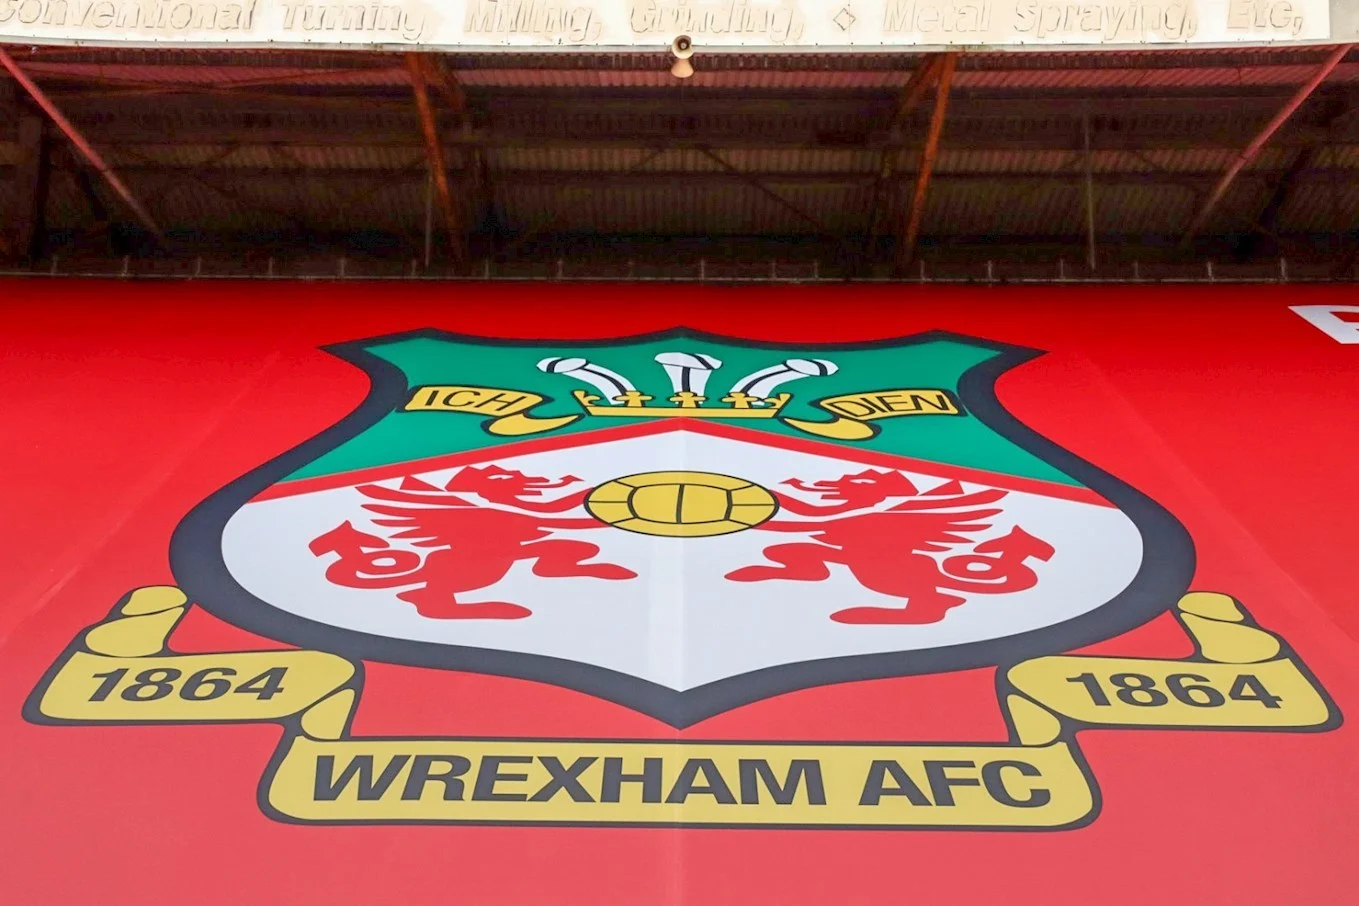 BBC Report:The Wrexham star took revenge on the club that trolled him by scoring a big goal